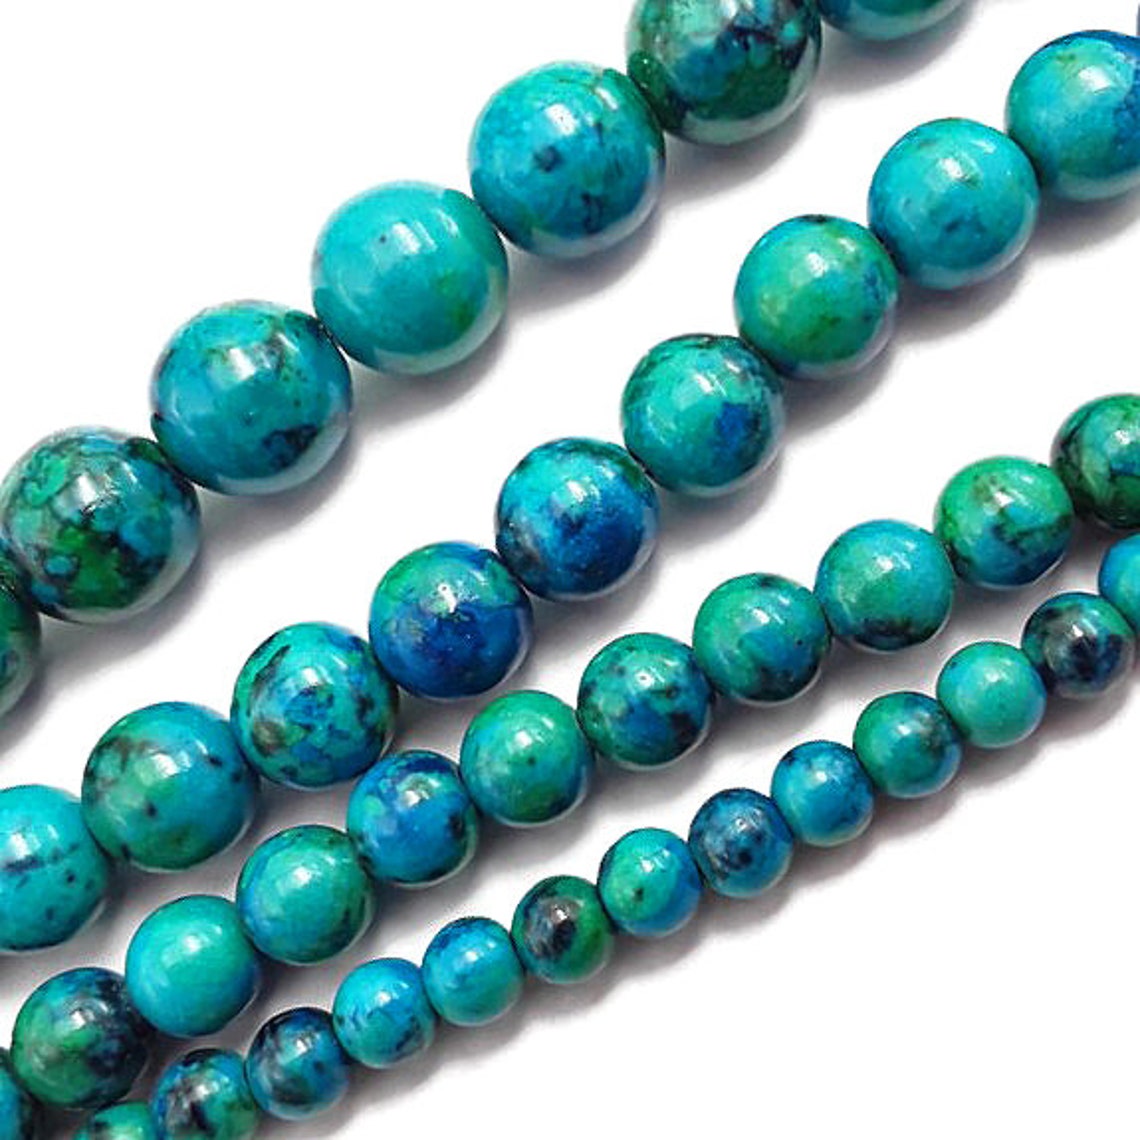 Azurite Smooth Round Beads 4mm 6mm 8mm 10mm 12mm 15.5 - Etsy